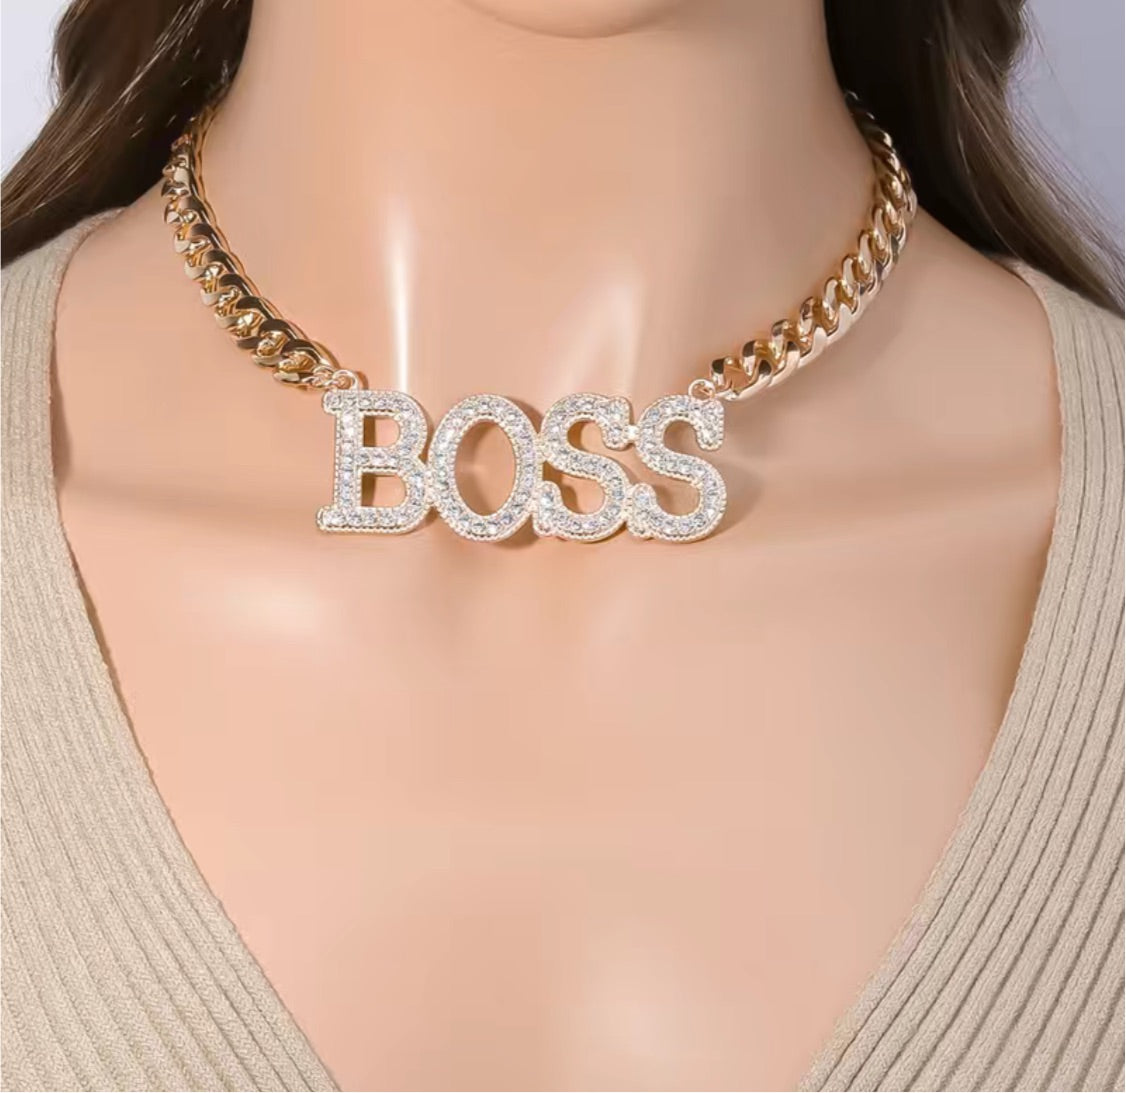 Exaggerated Choker Necklace BOSS Letter With Chunky Hollow Chain Adjustable Hip Hop Golden Neck Chain For Party / Nightclub - Panther®